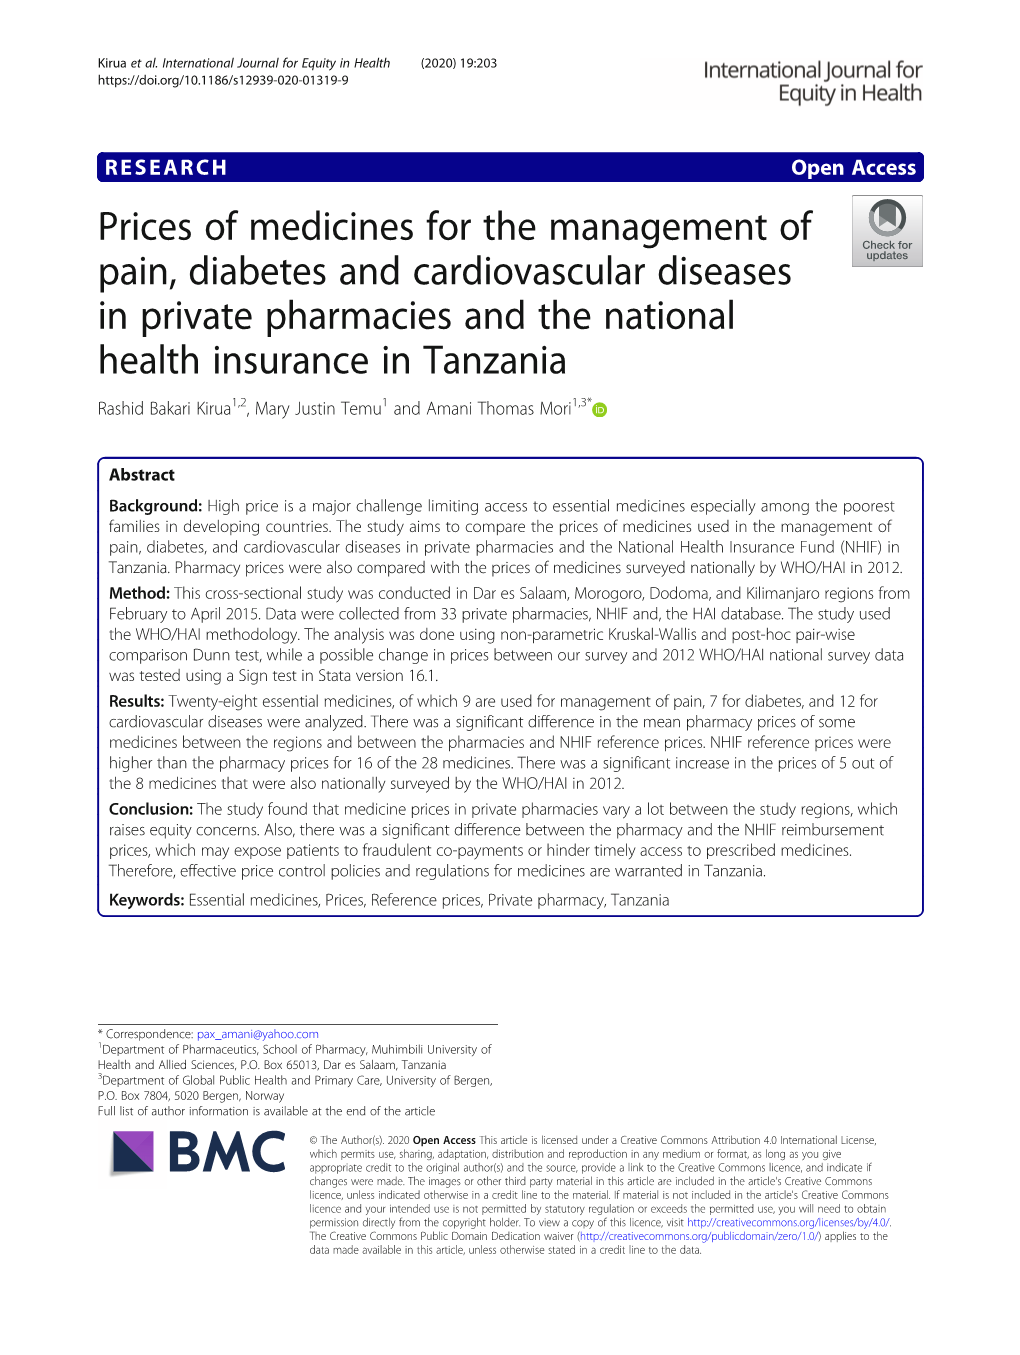 Prices of Medicines for the Management of Pain, Diabetes And